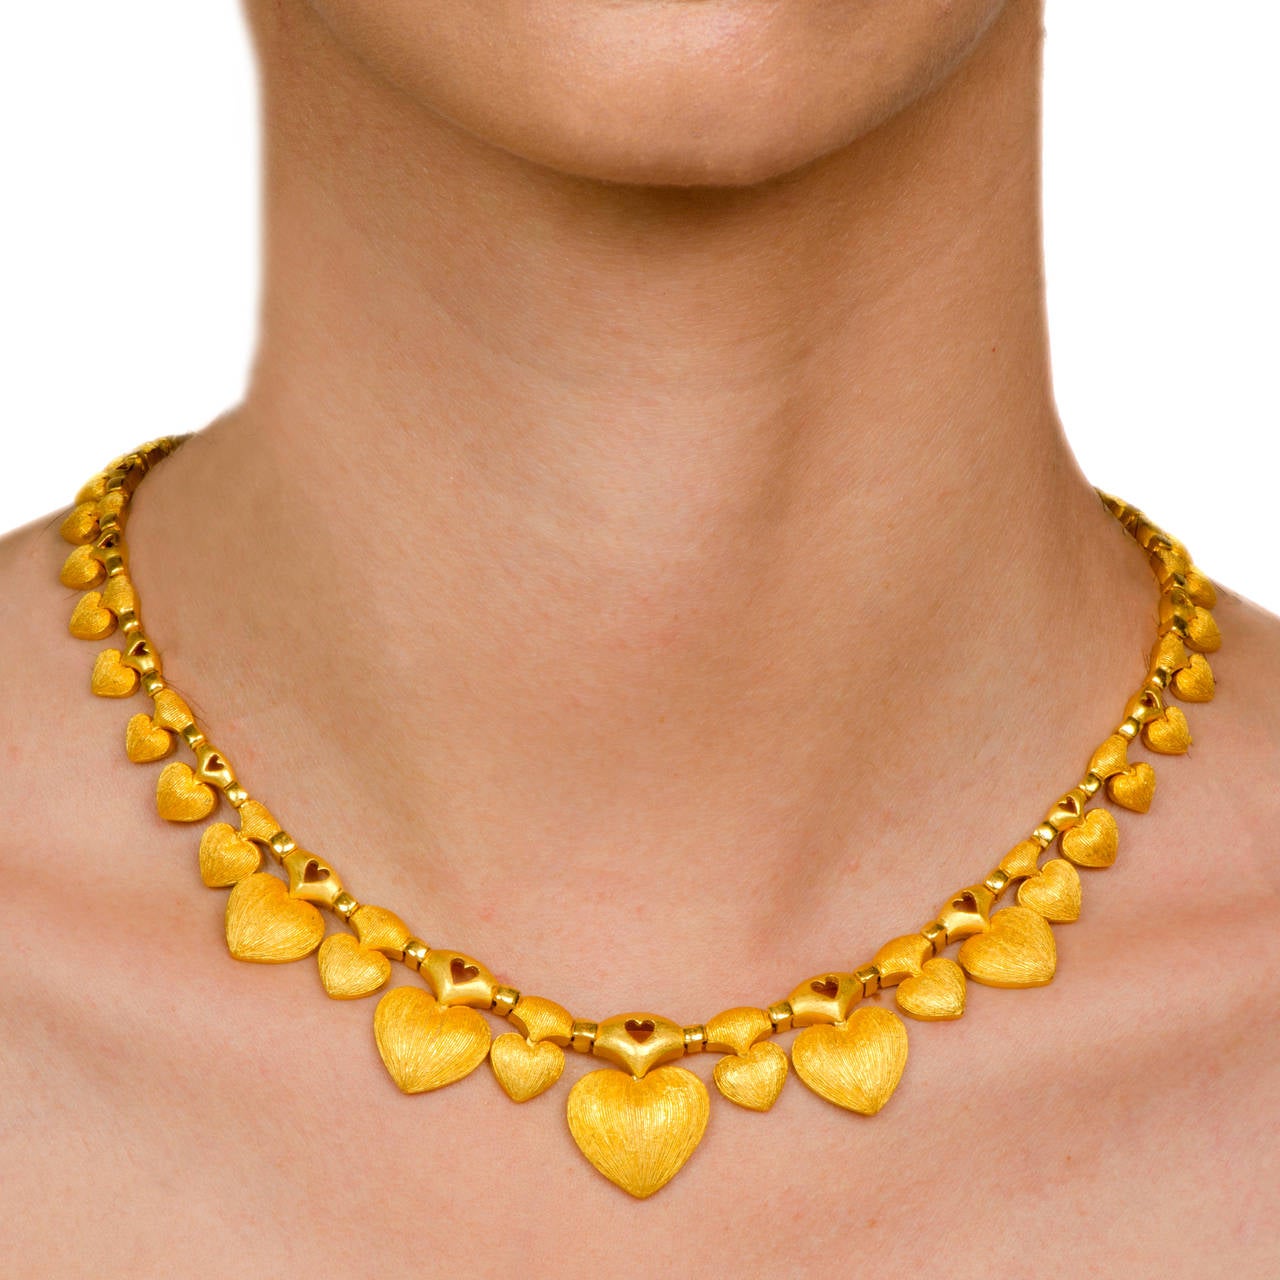 This elegant estate necklace with romantic heart motif pendants  is crafted in solid 24k  yellow gold.  This immaculately crafted  necklace incorporates a gold chain from which  suspend  delicate heart-shaped silhouettes of different sizes, with the